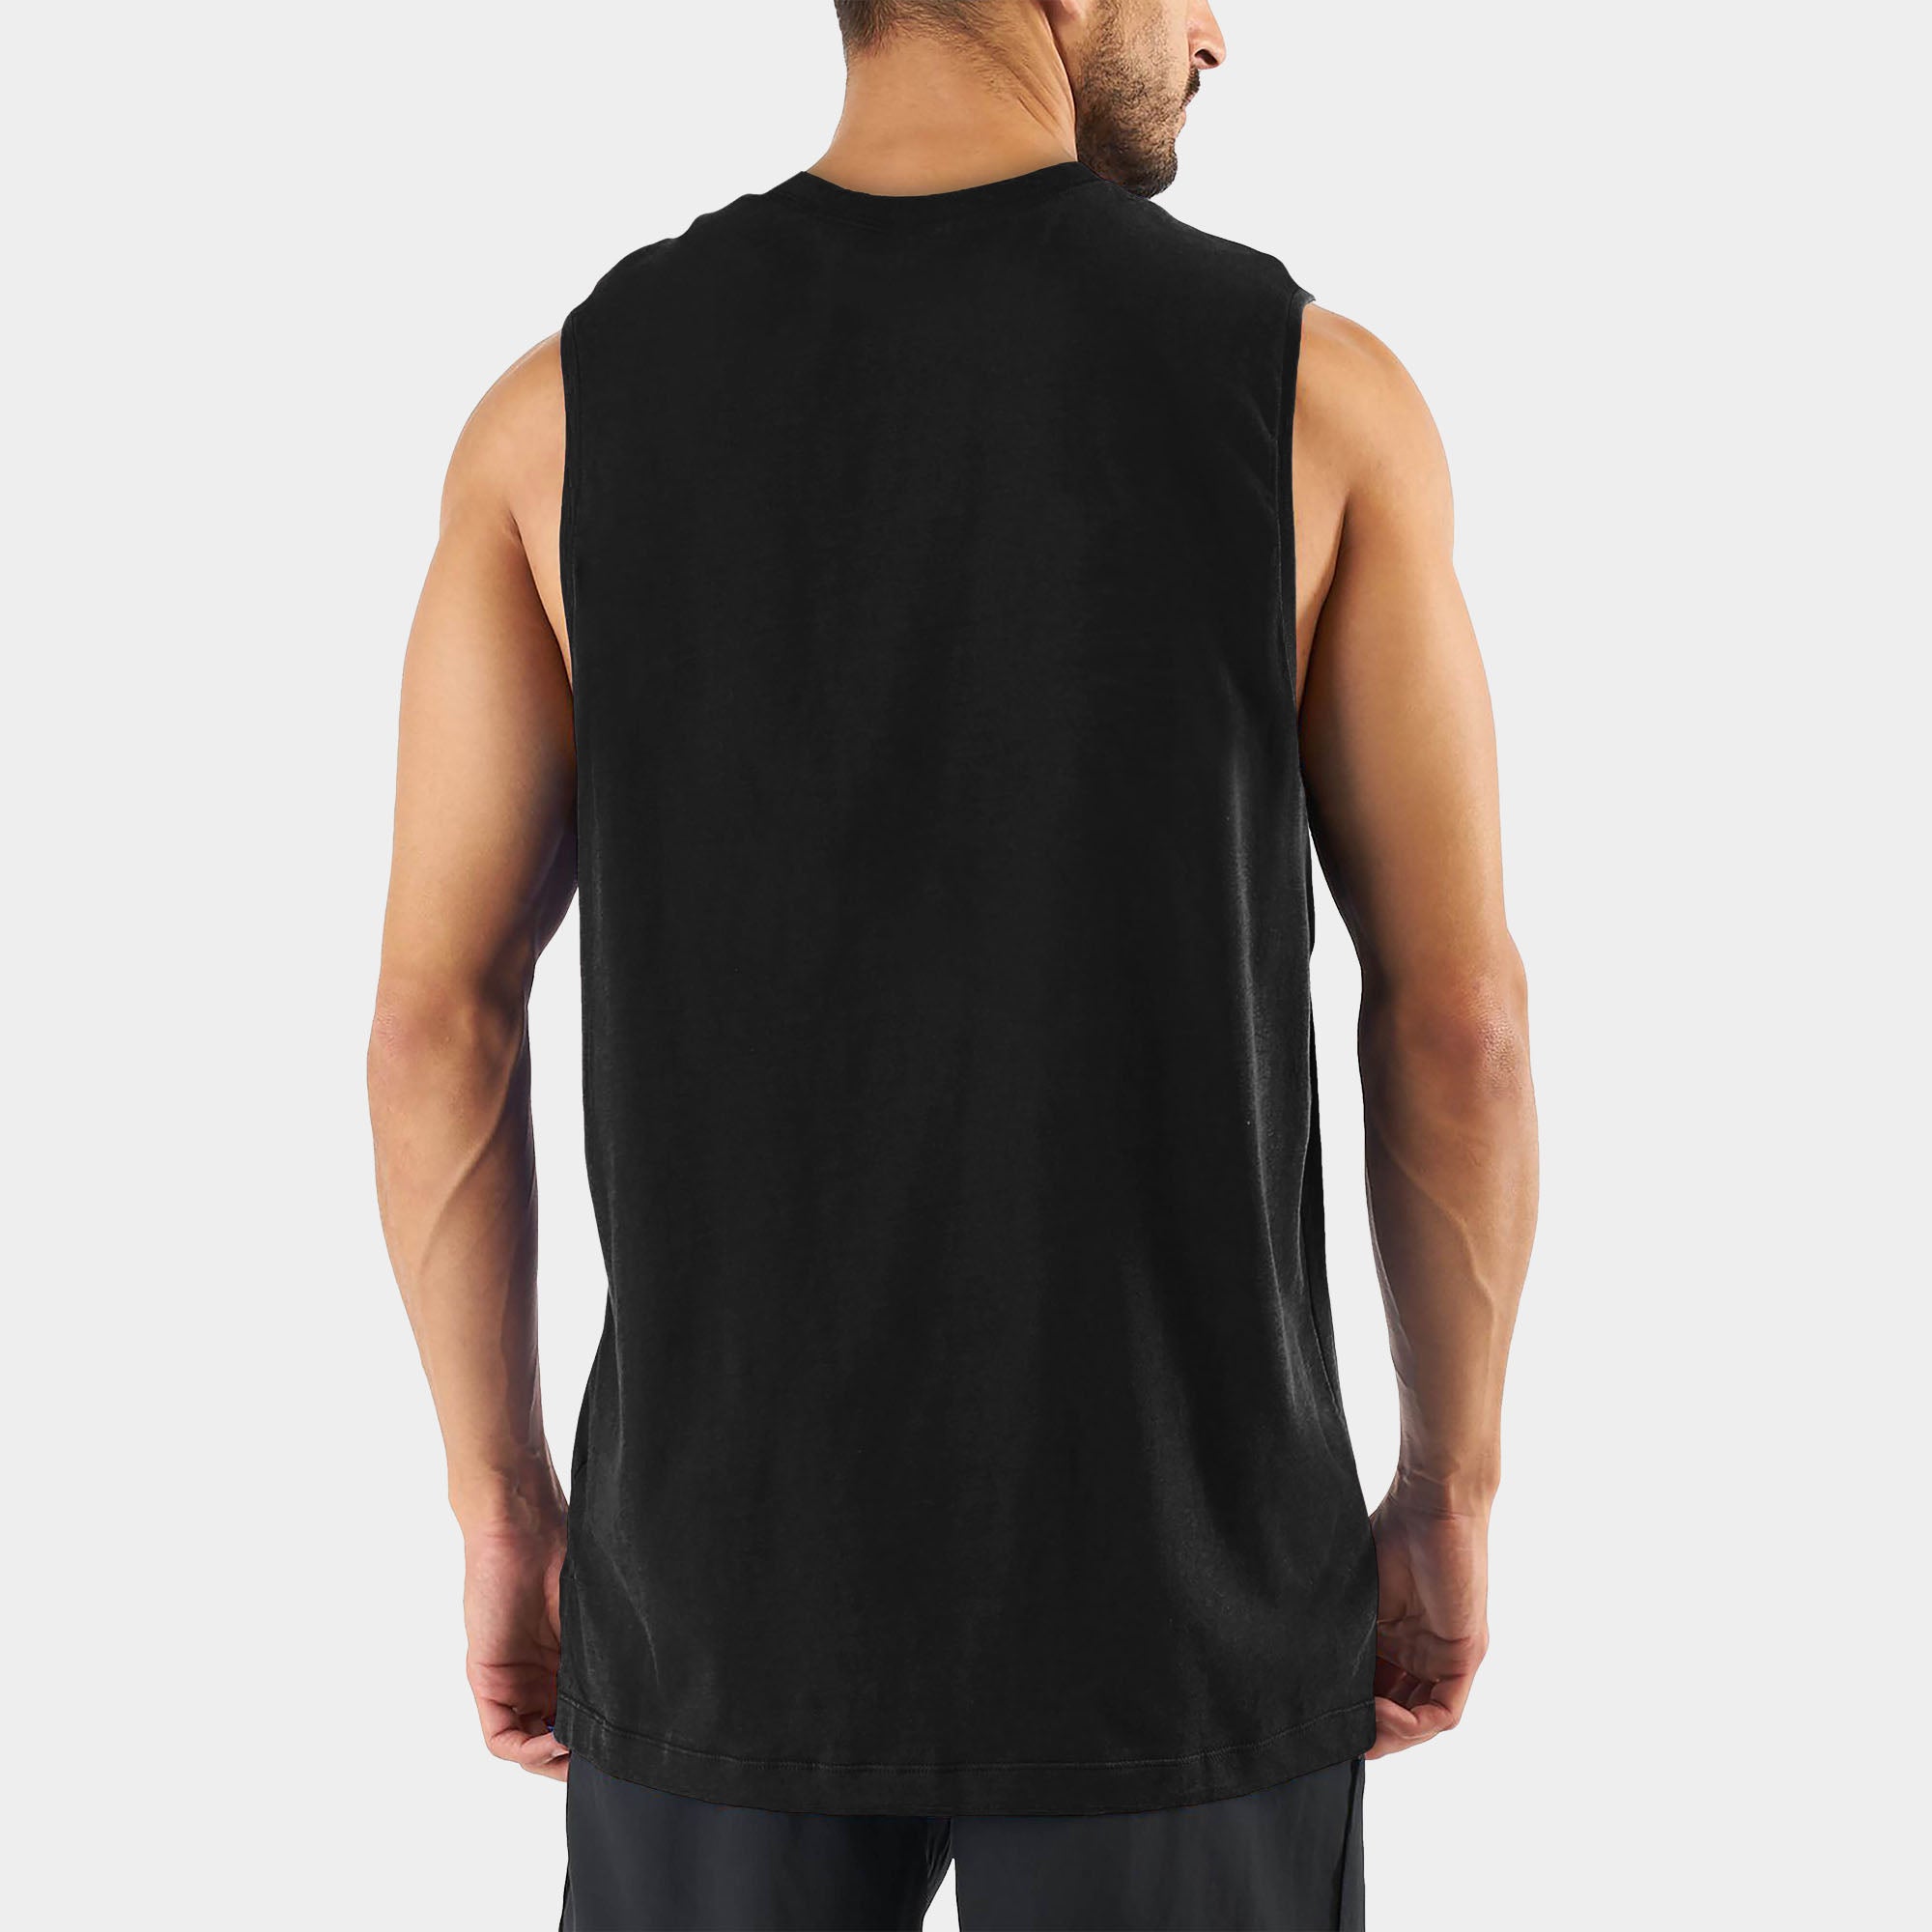 muscle_tank top_for_mens_sleeveless jersey_t shirt_jays_camiseta sin mangas_muscular_stafford shirts_youth_3xl_thermal tops_club dress_big and tall_tutle necks_shurt_muscle_topes_peterbilt_heavyweight_heavy weight _duty_ready_heather gray_cotton_roomie shirt_gym workout_without undershirt_black sando_cutoff sports_vivid color_colour_Black